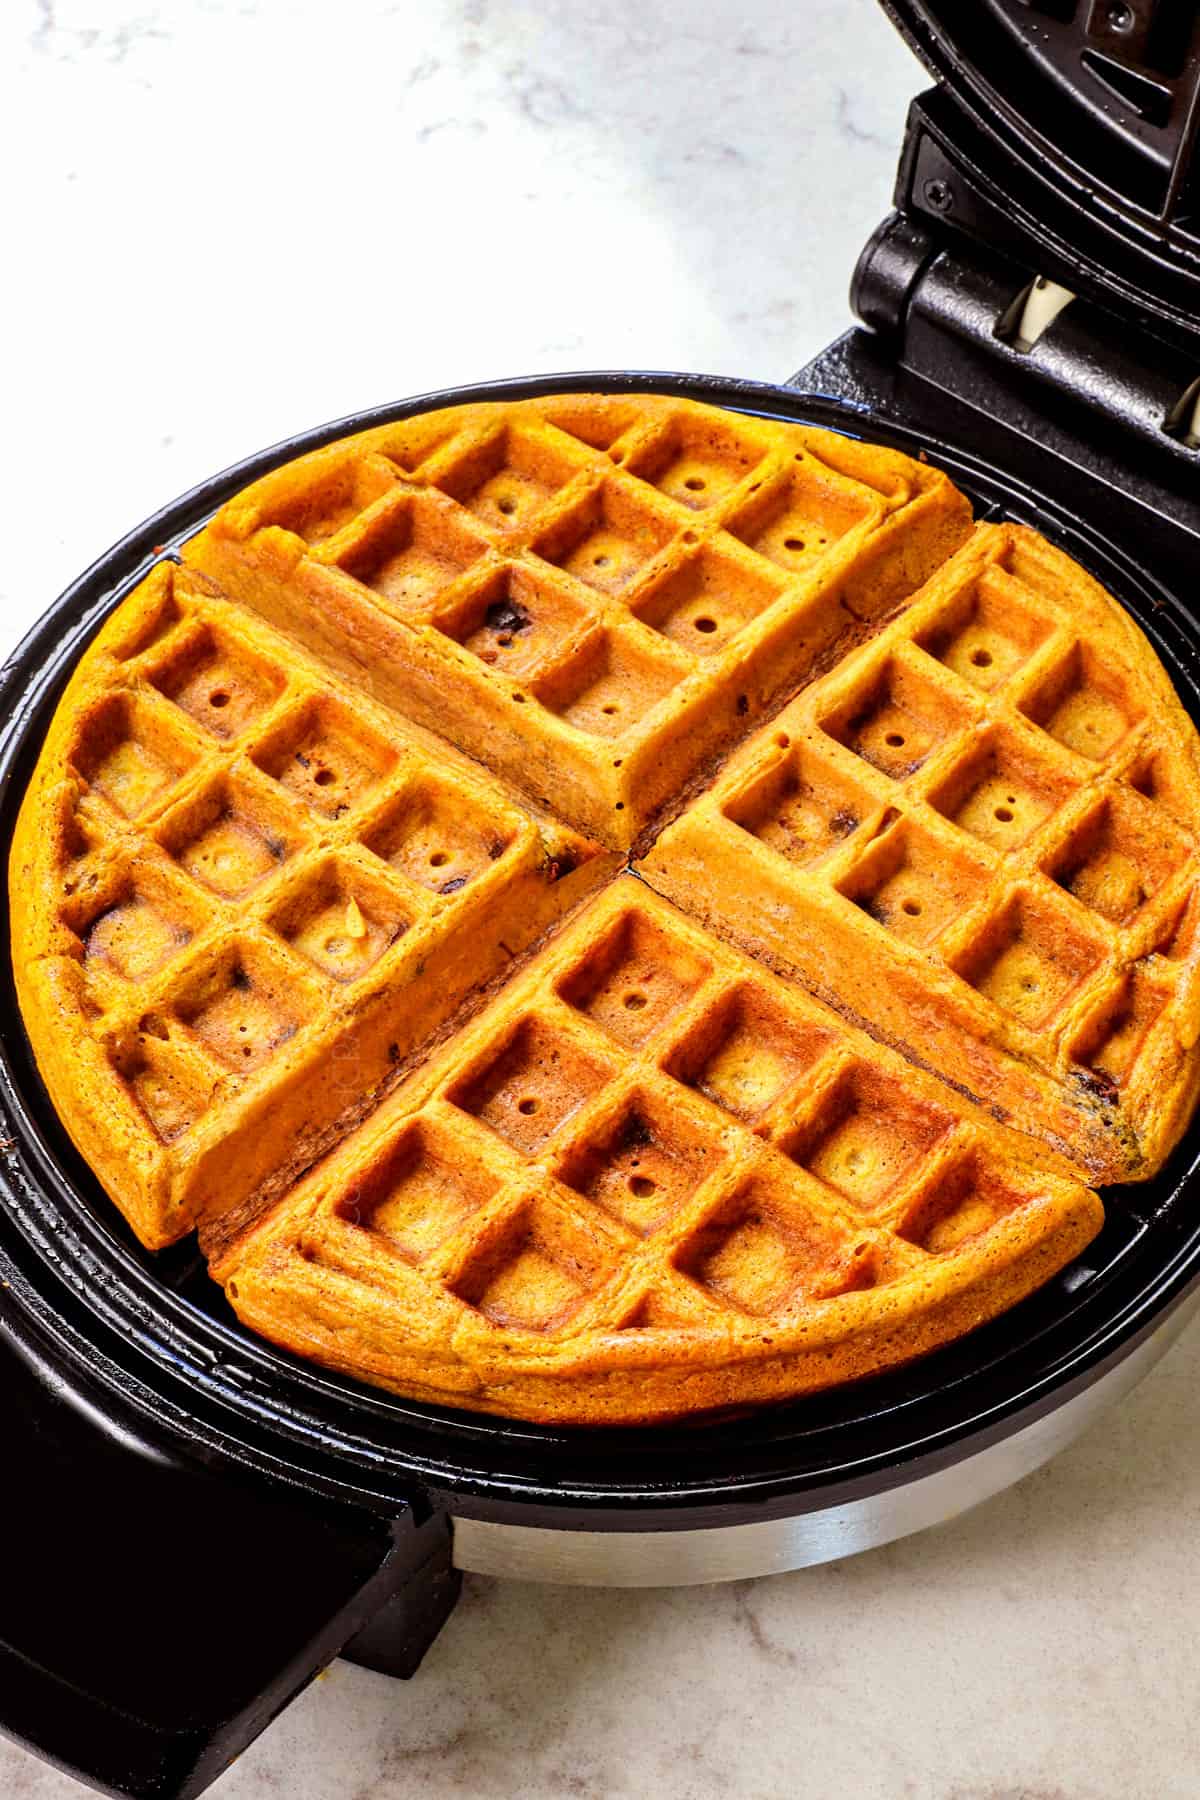 showing how to make pumpkin waffles by cooking in a waffle iron until crispy on the outside and soft on the inside